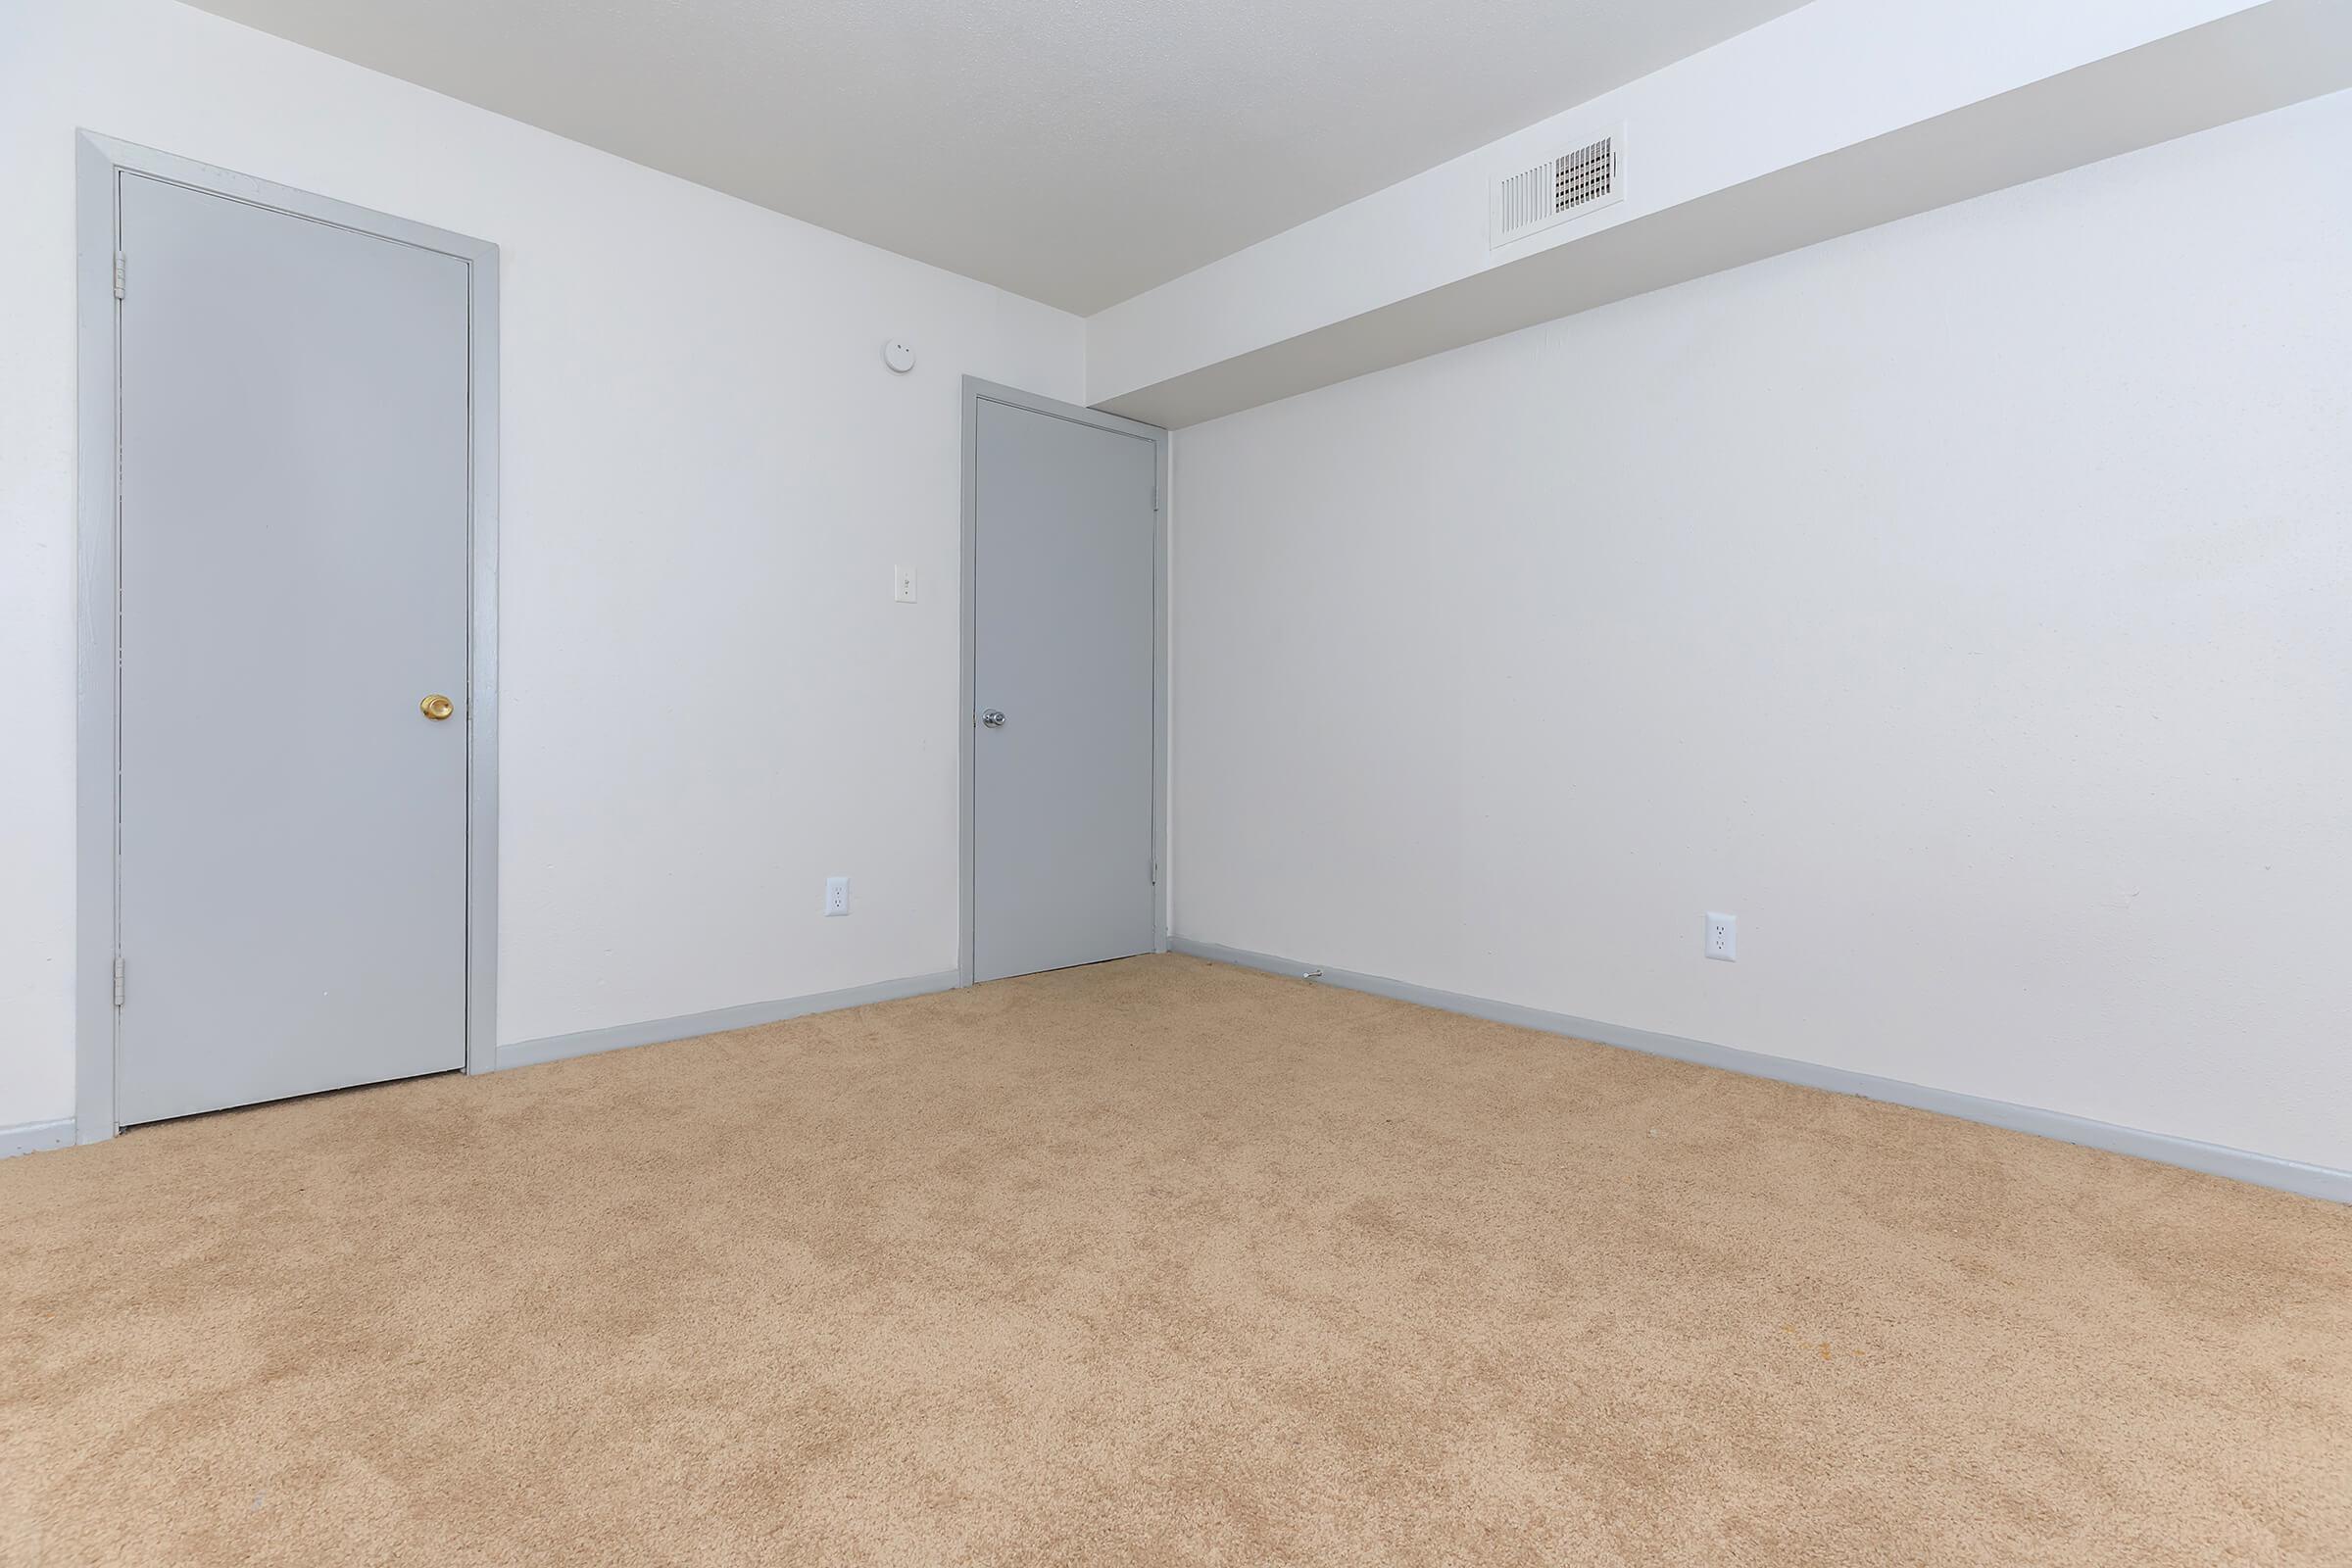 APARTMENTS FOR RENT IN BEAUMONT, TX